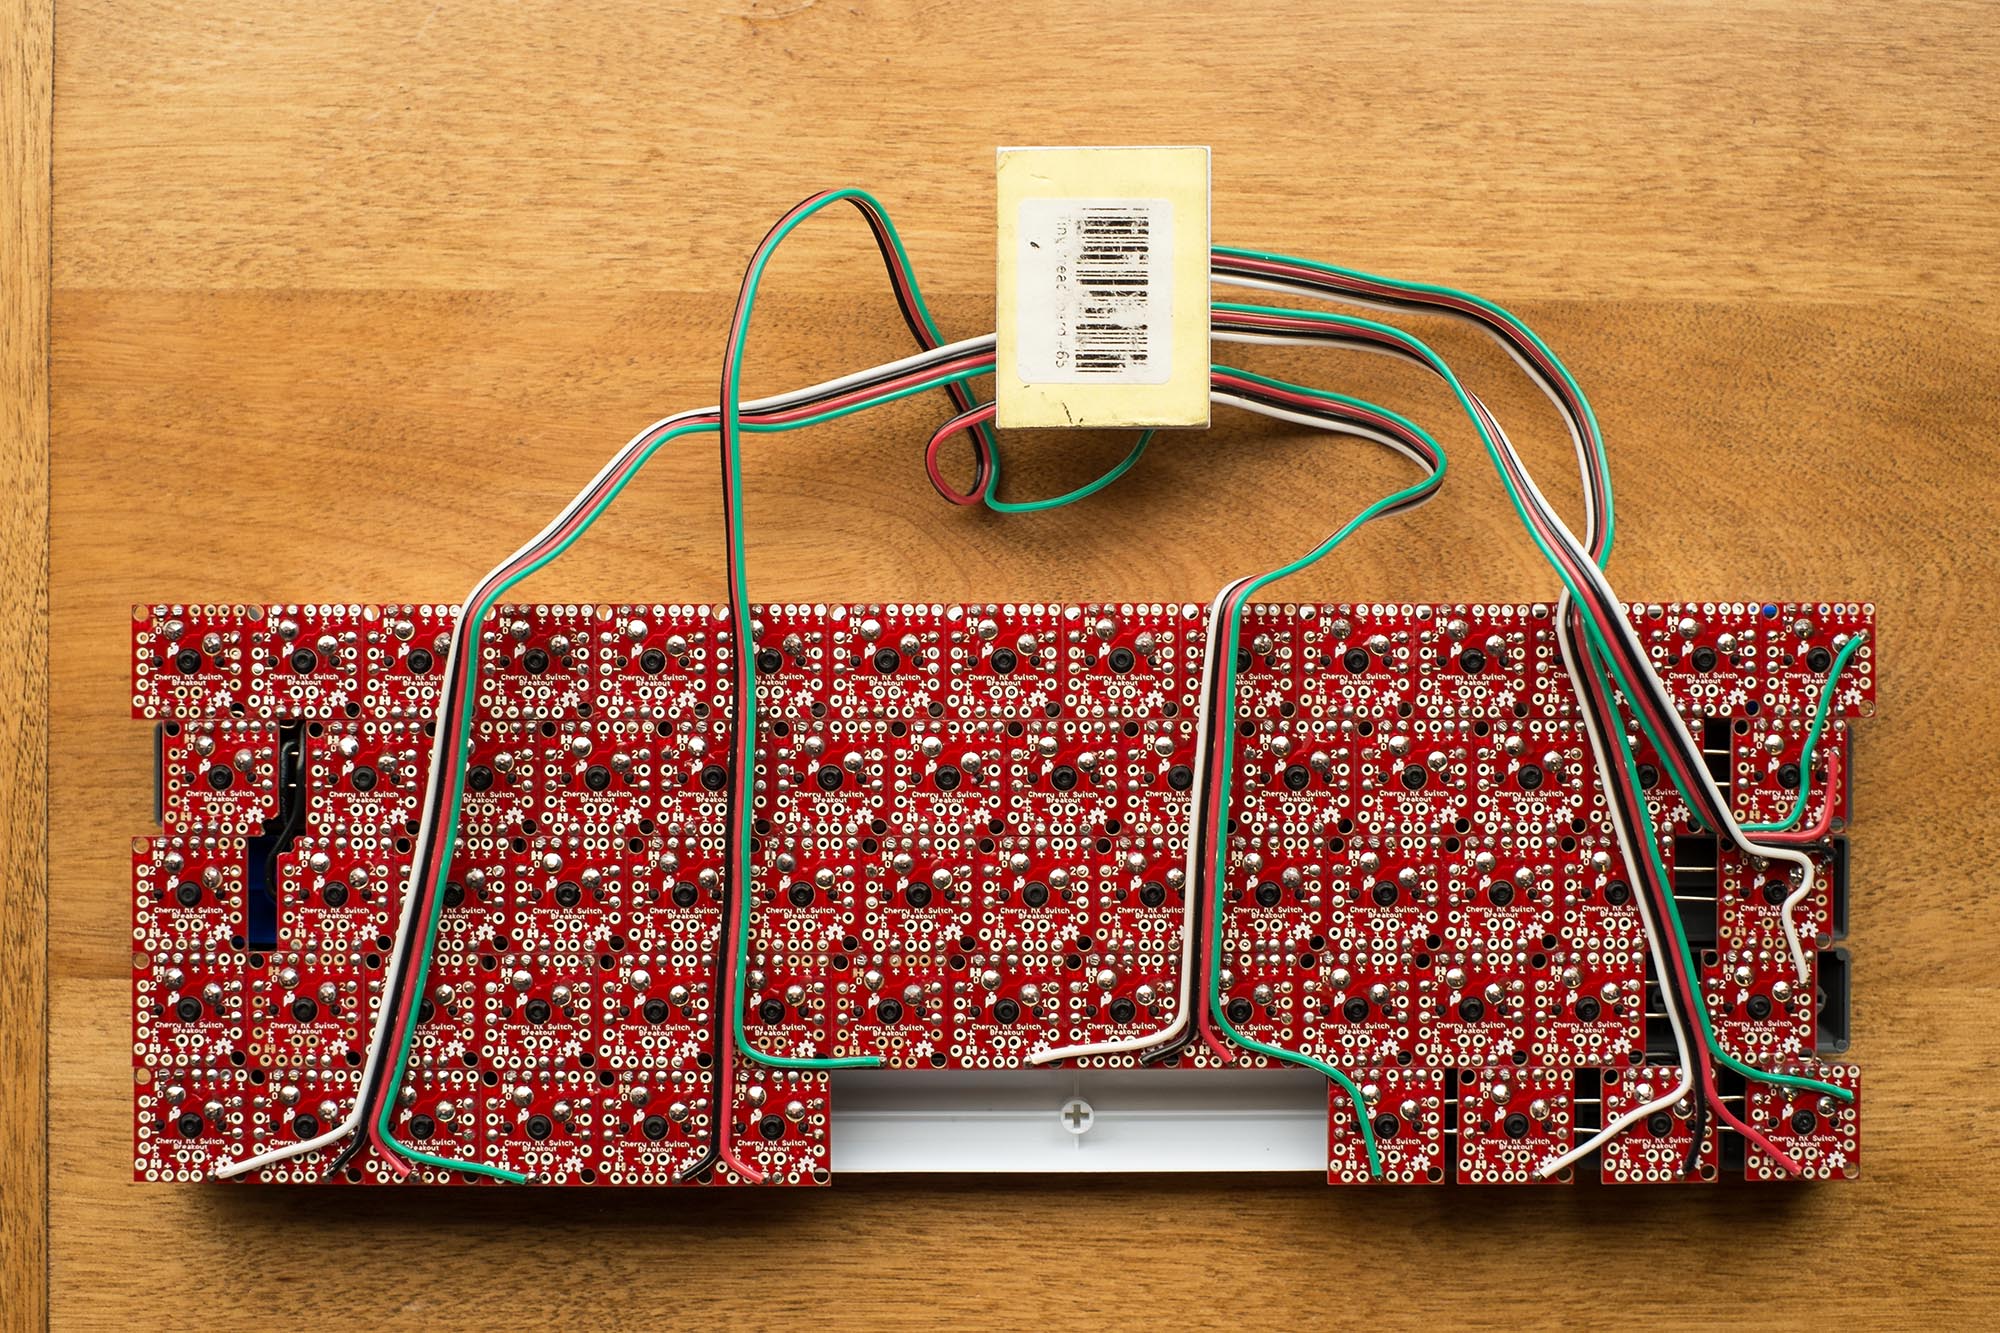 Bottom view of keyboard with switches soldered on and roughly wired to microcontroller